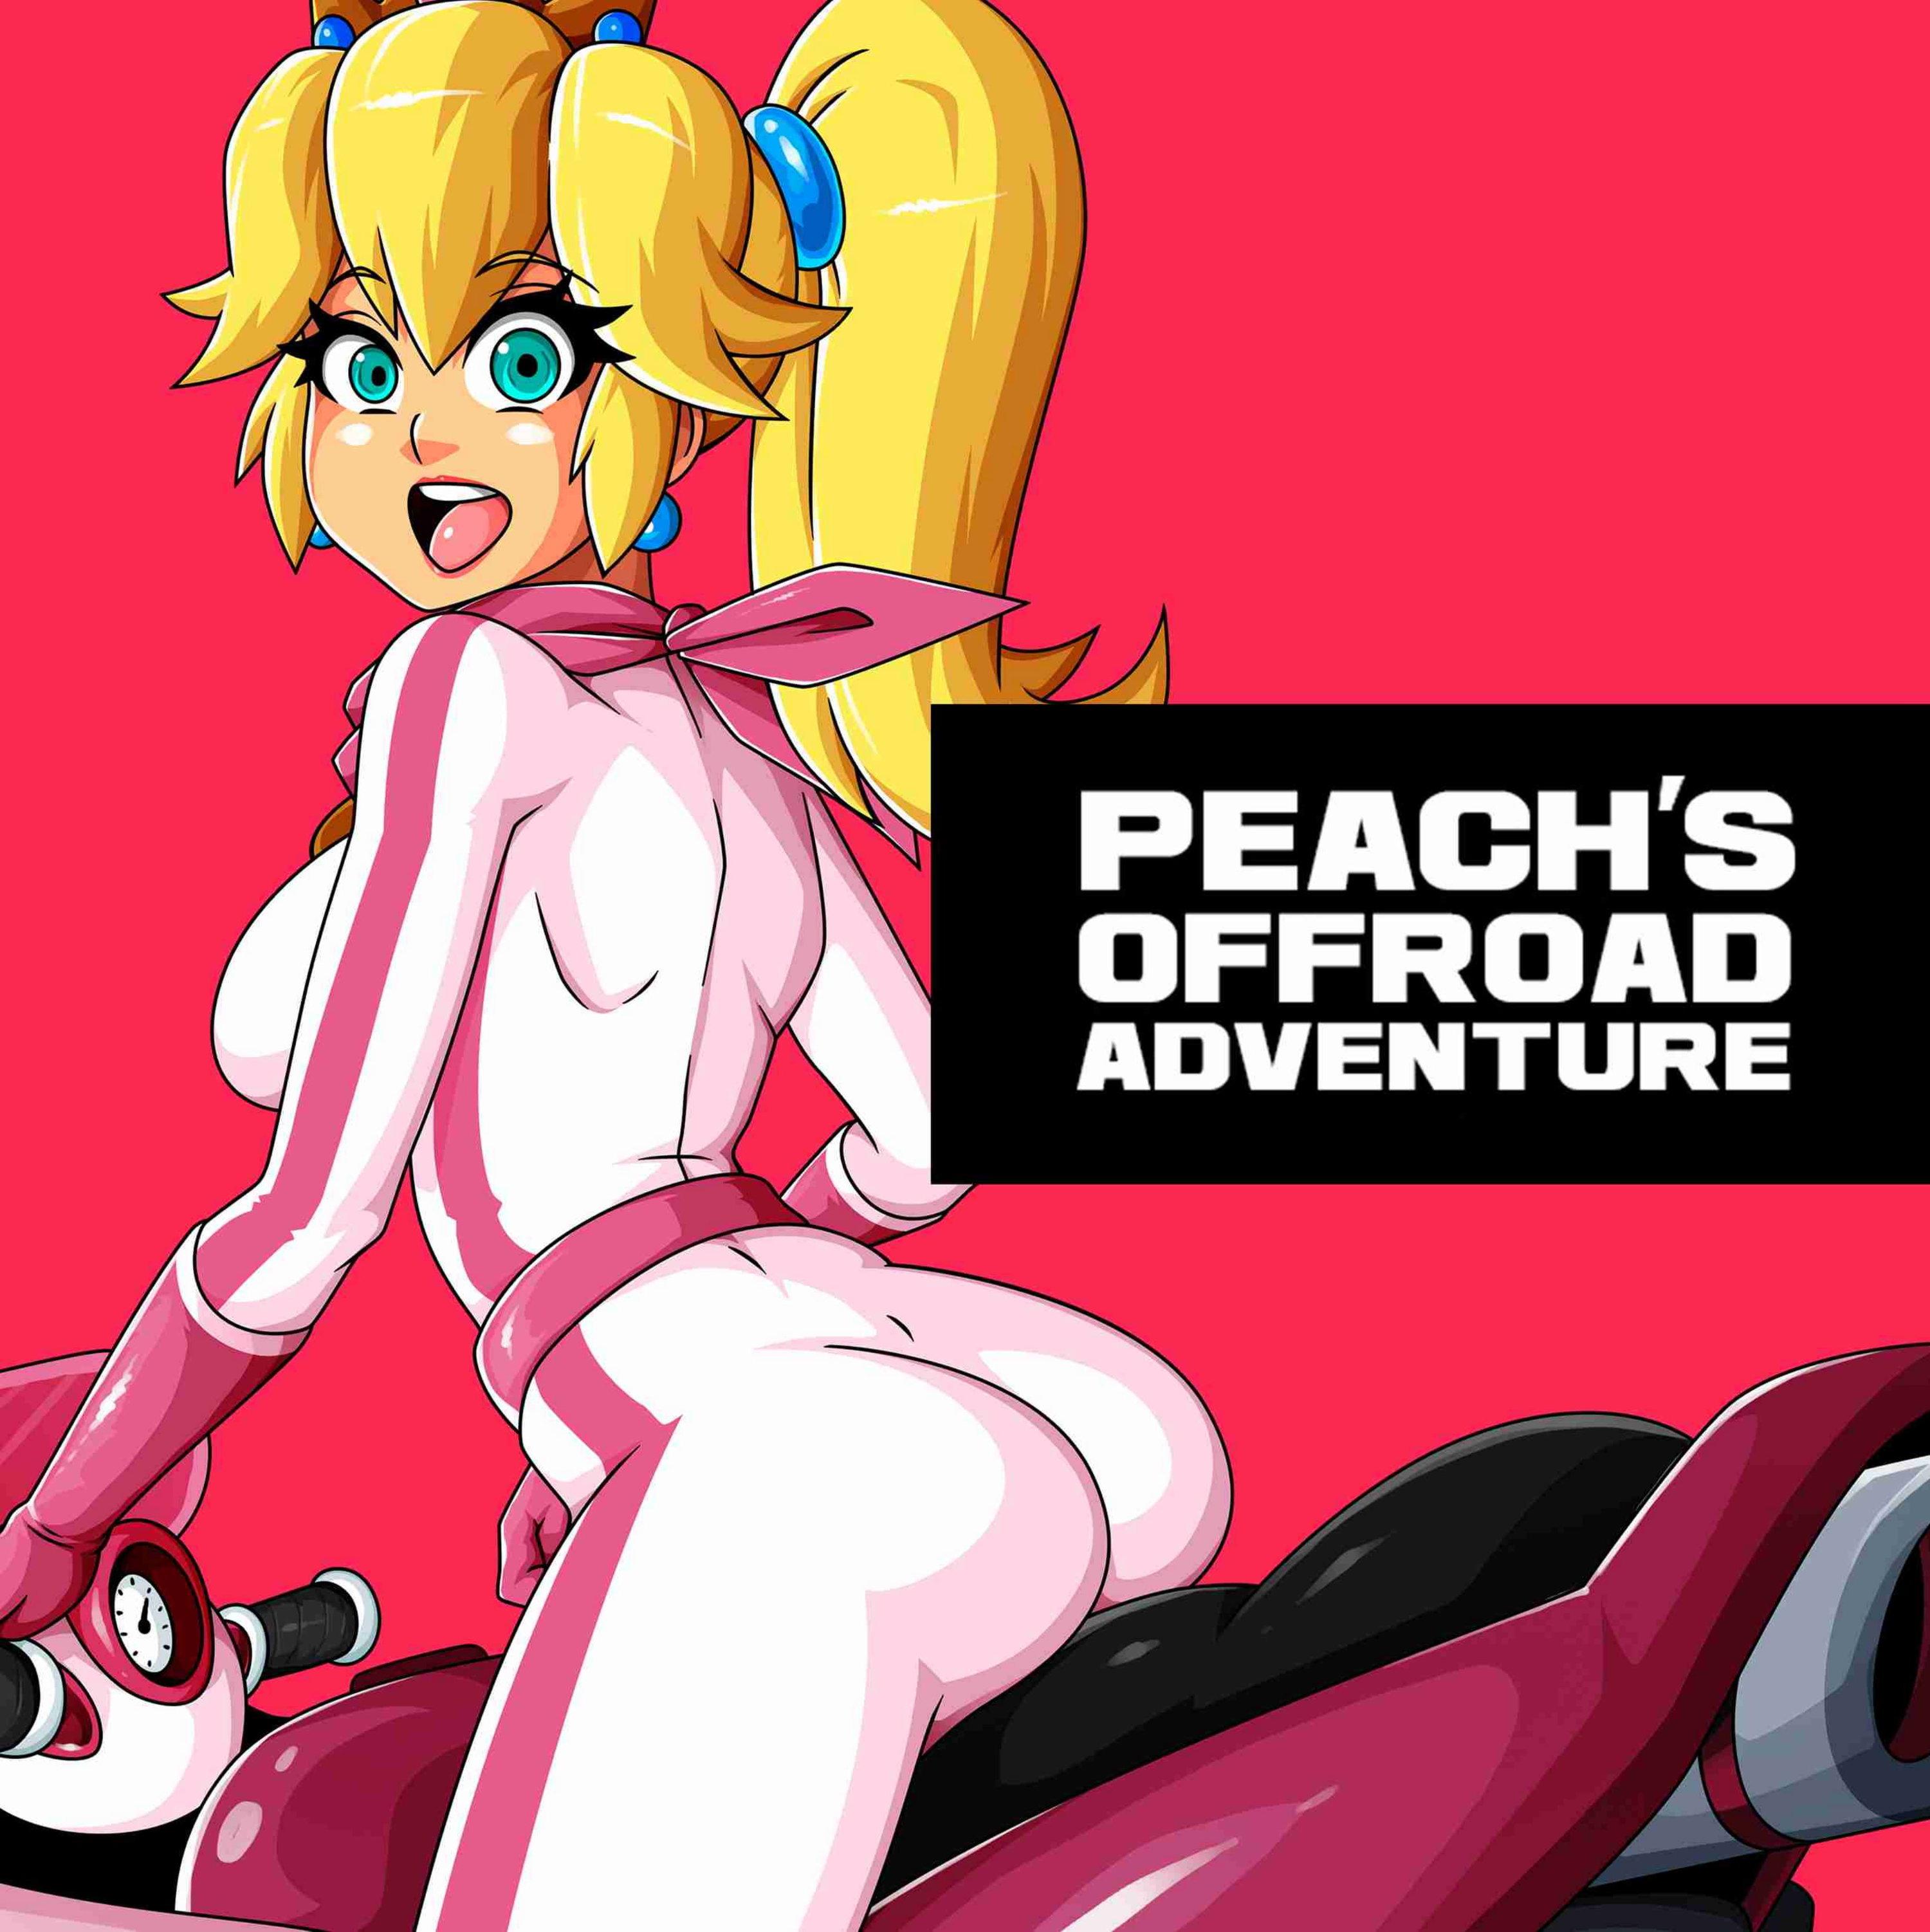 Witchking00 – Peach’s Offroad Adventure